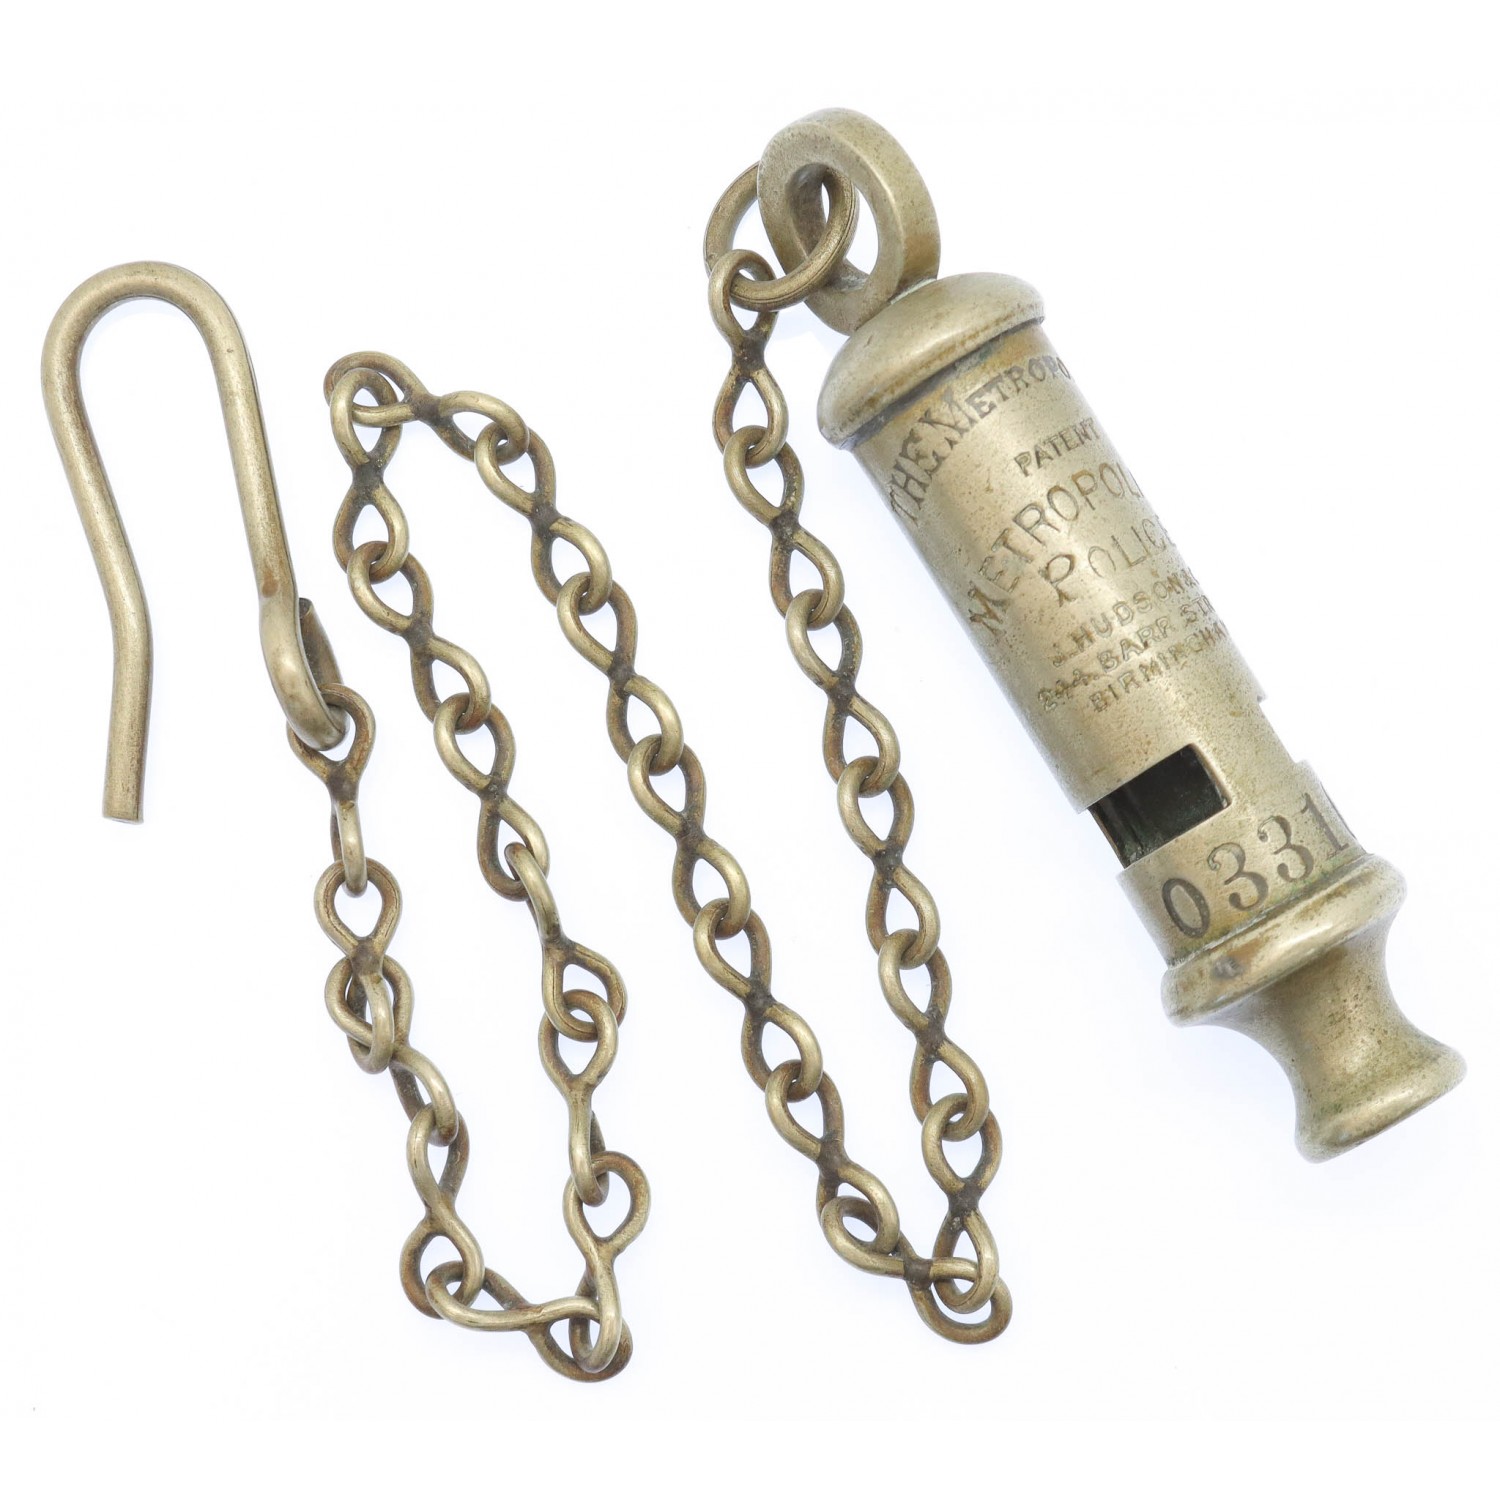 Metropolitan Police 'The Metropolitan' Patent Numbered Whistle & Chain ...